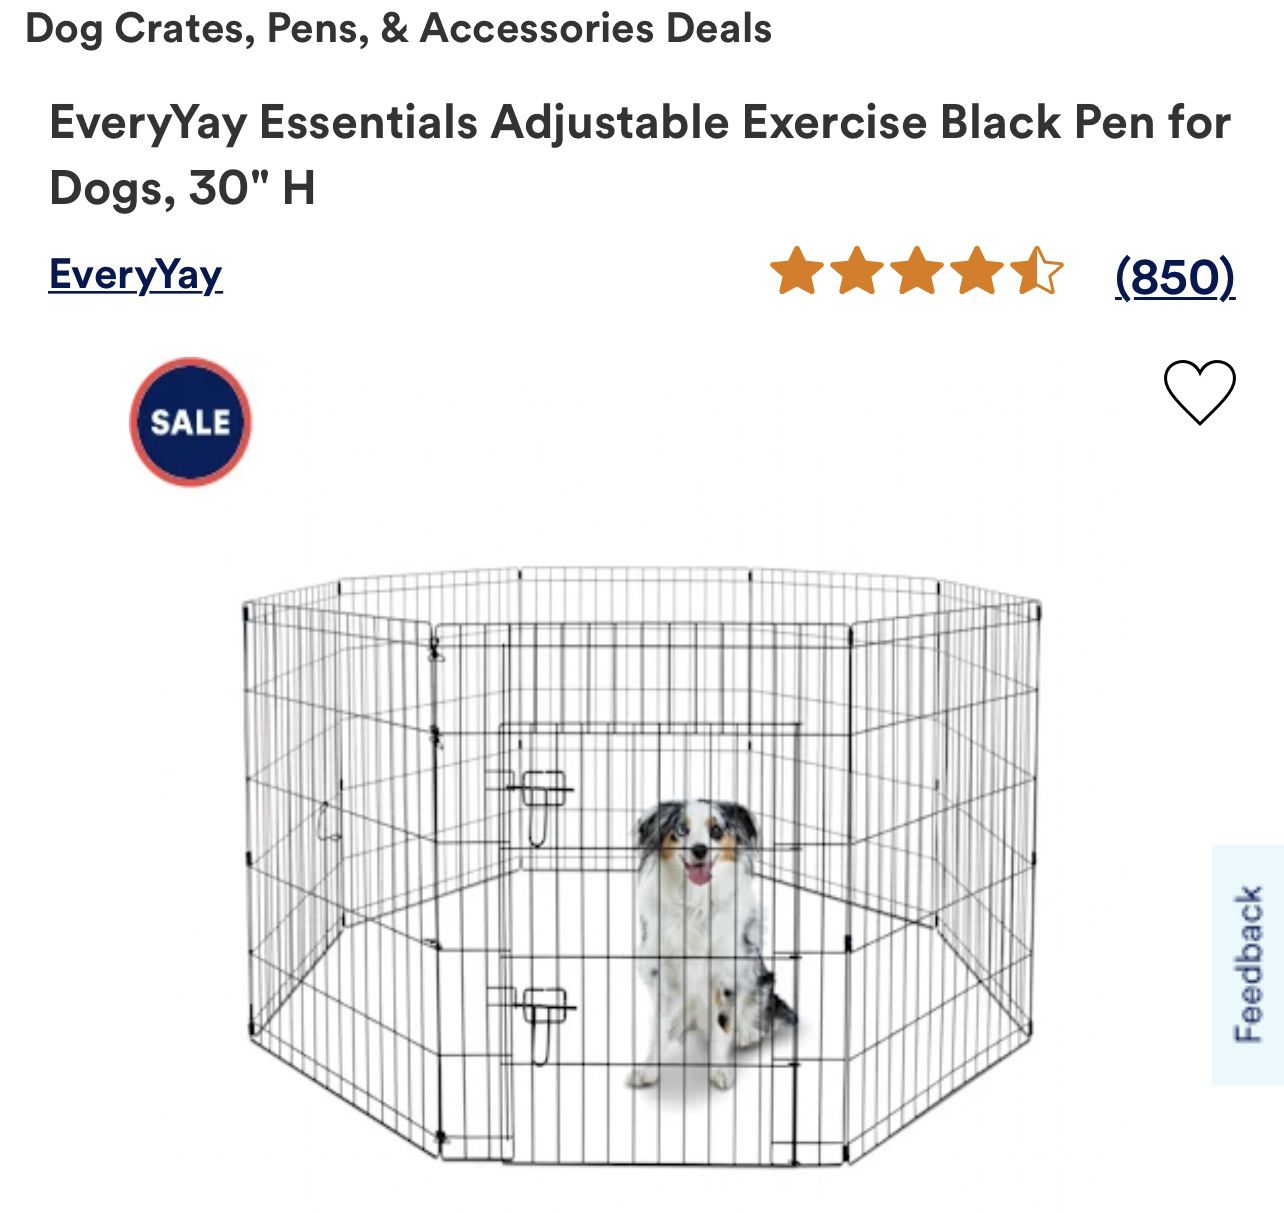 EveryYay Essentials Adjustable Exercise Black Pen for Dogs, 30" H